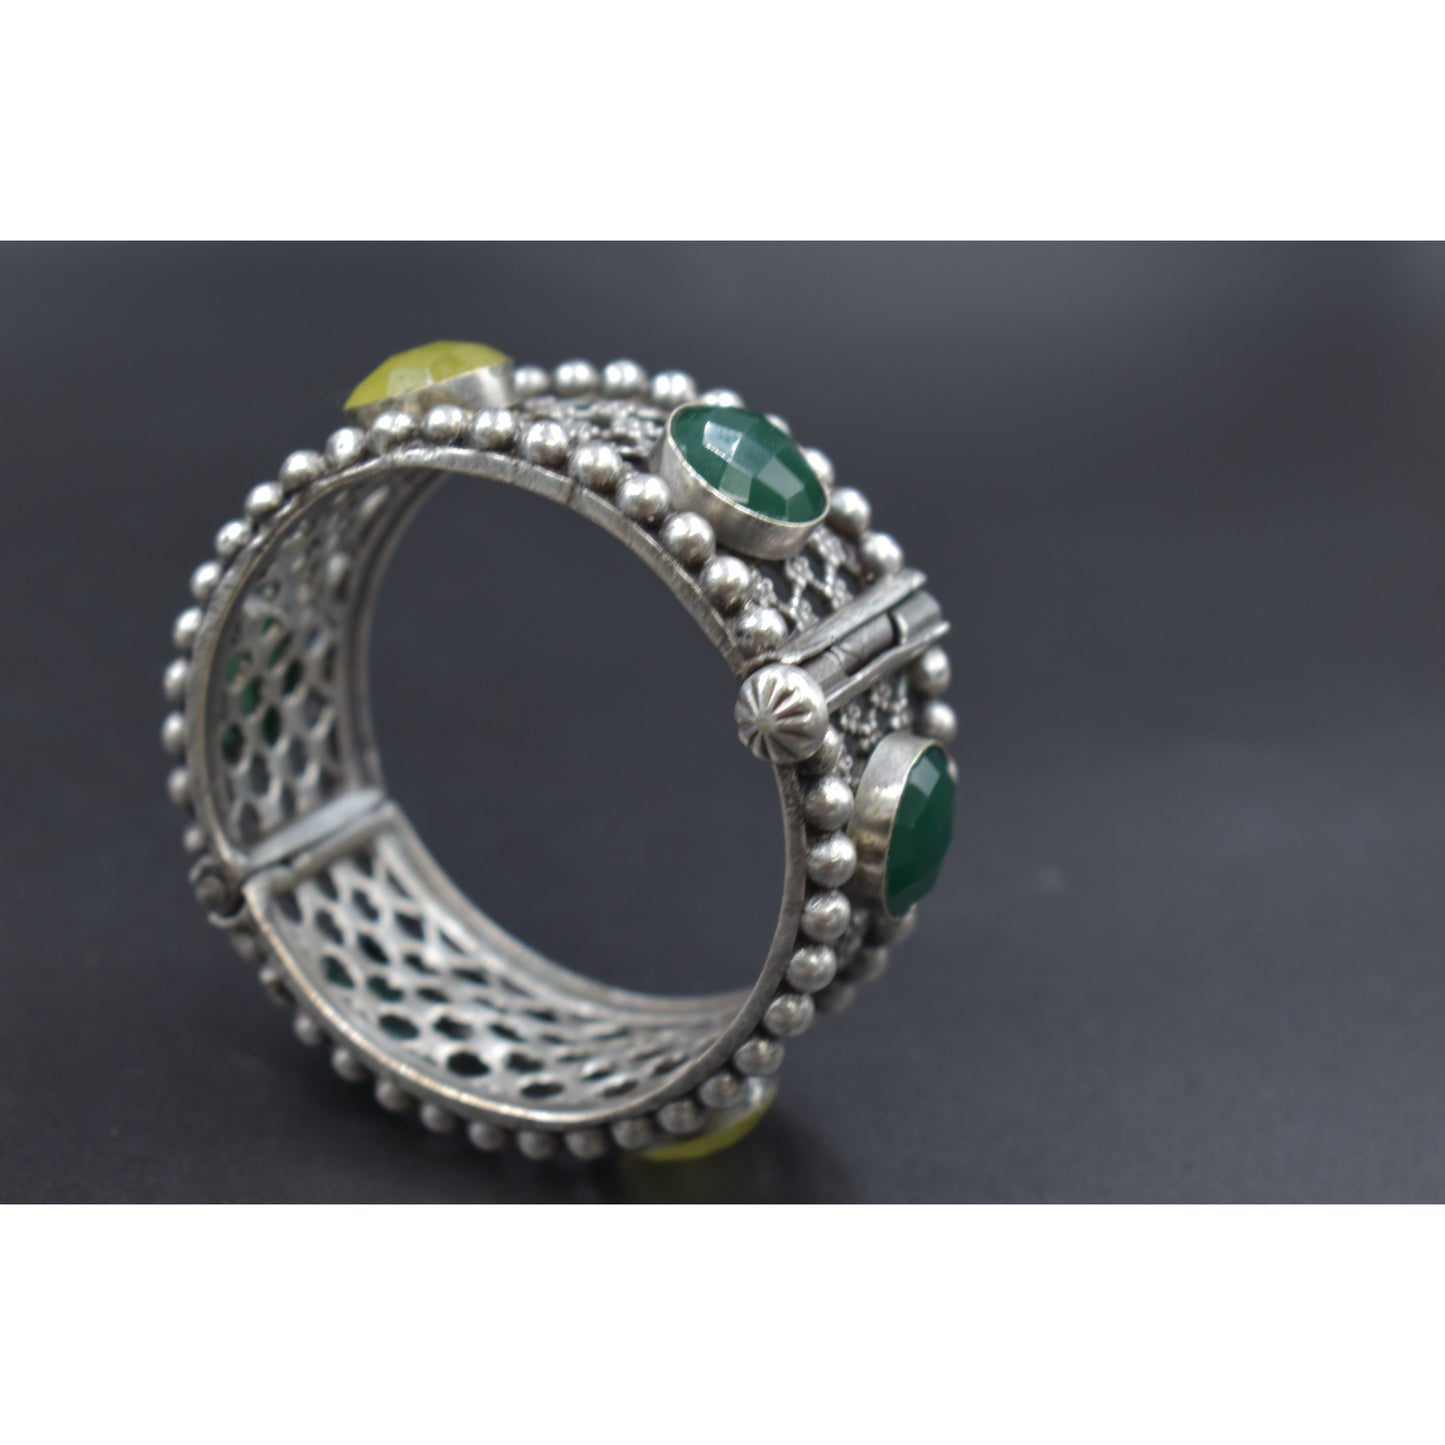 A pair of stone silver look alike bangle